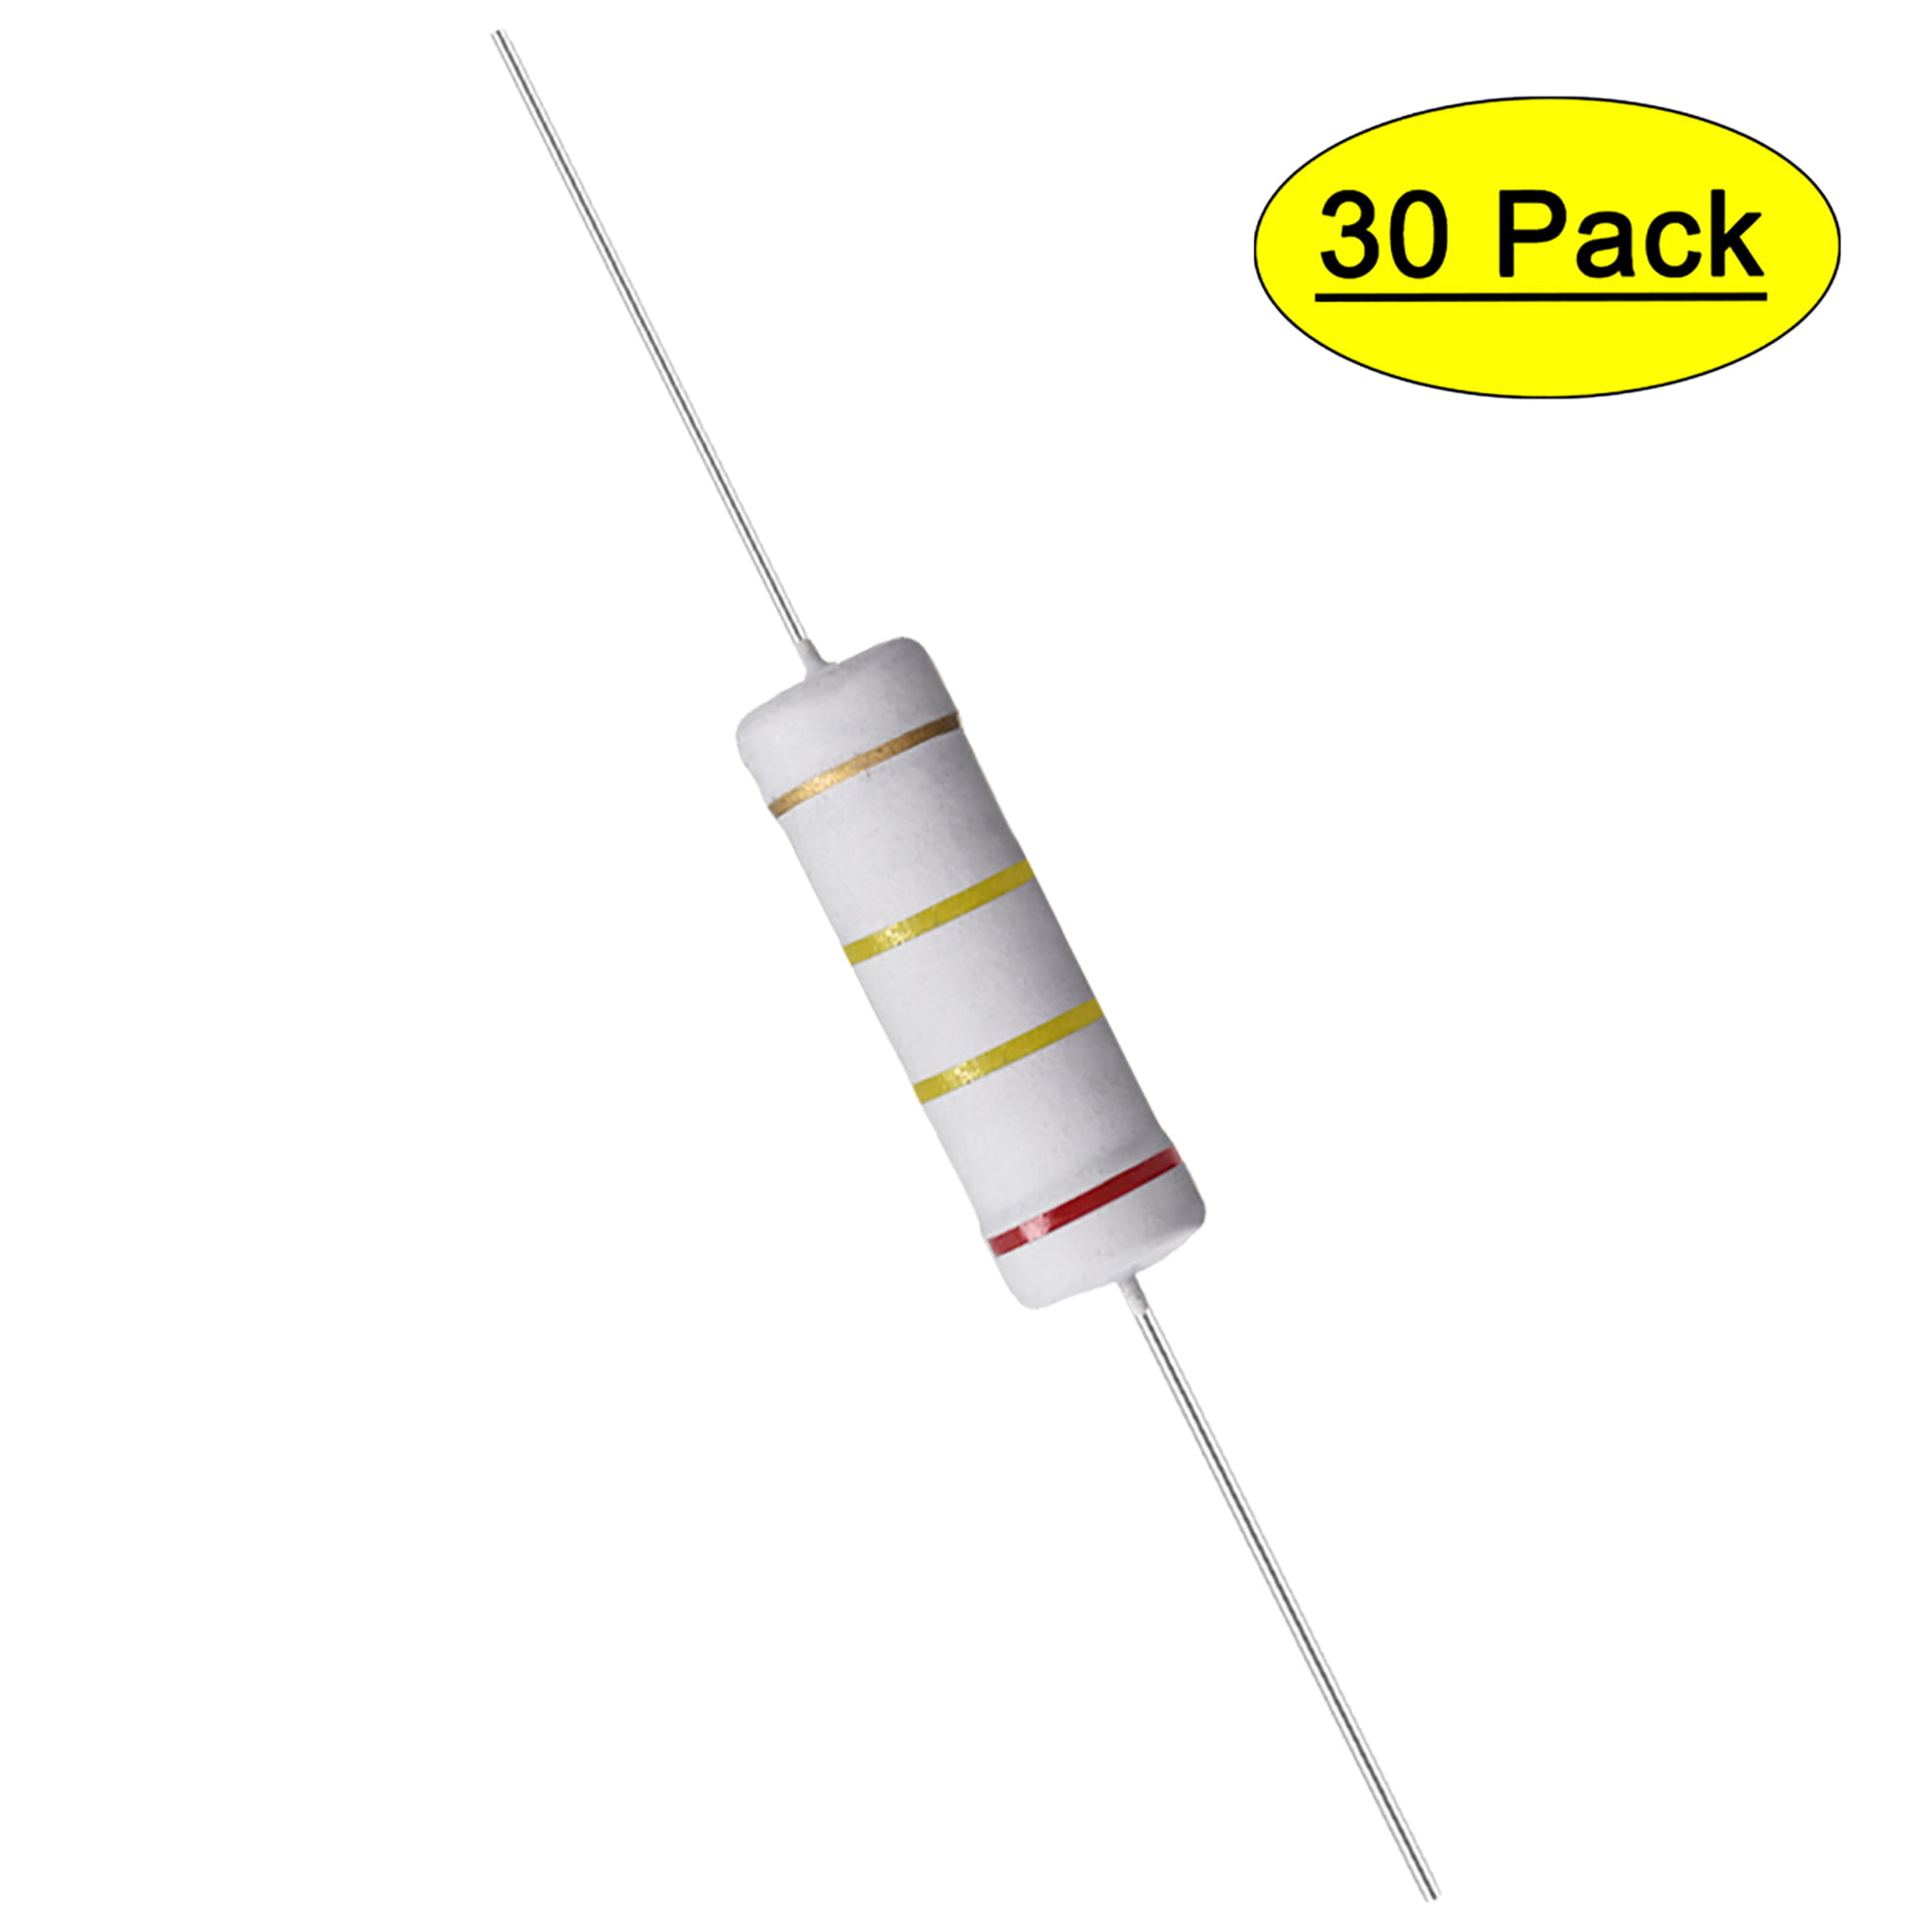 uxcell 5W 5 Ohm Power Resistor Ceramic Cement Resistor Axial Lead 15 Pcs White 